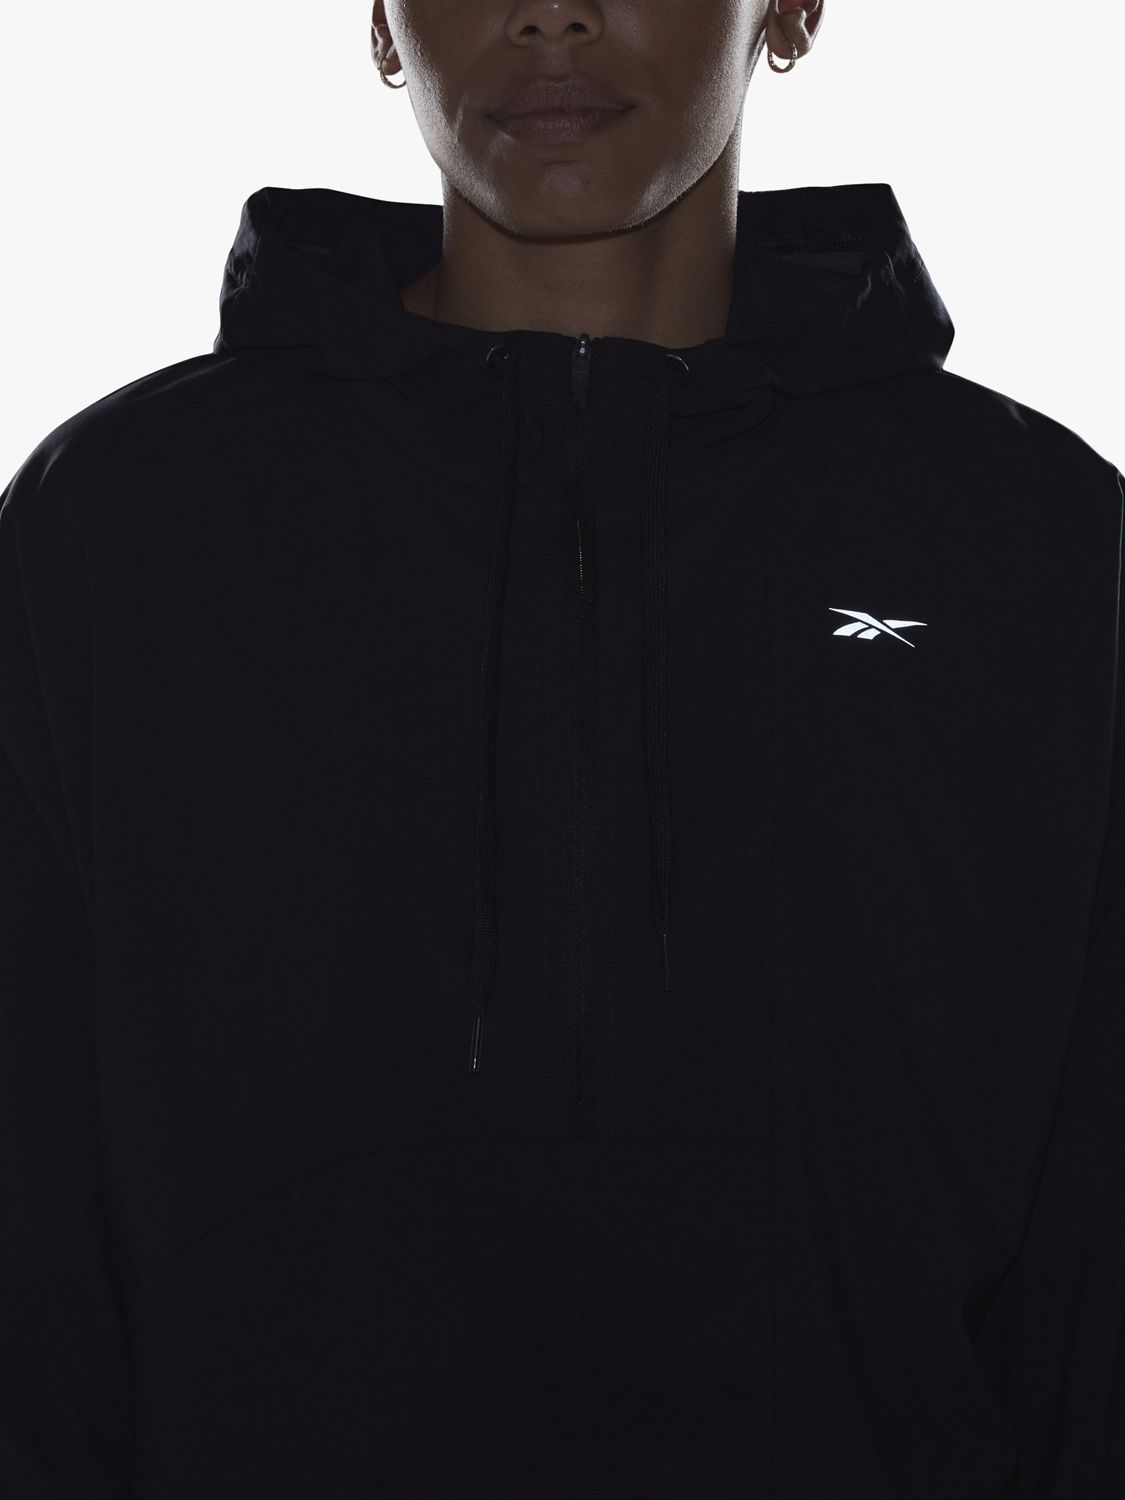 Buy Reebok Woven Recycled Running Jacket Online at johnlewis.com